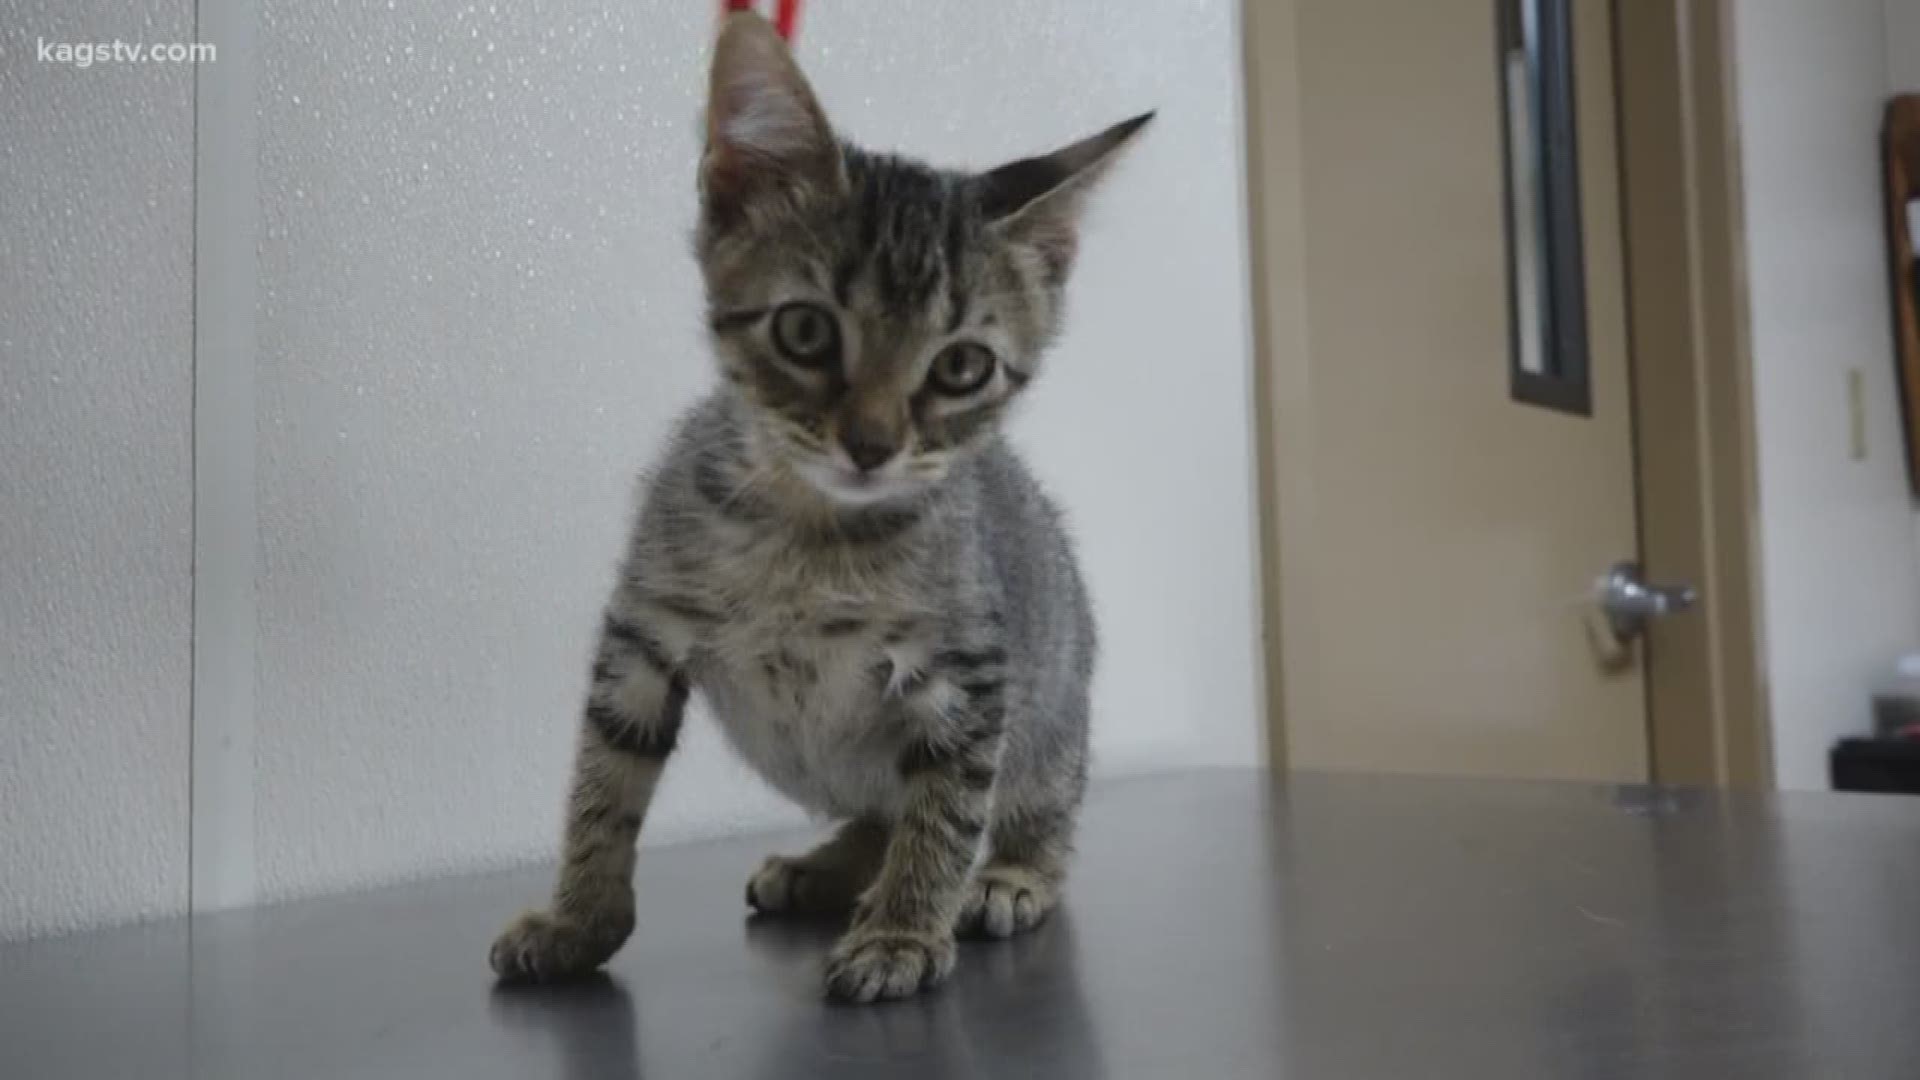 KAGS Pet of the Week: Tabby kitten Tom Collins is ready to go home